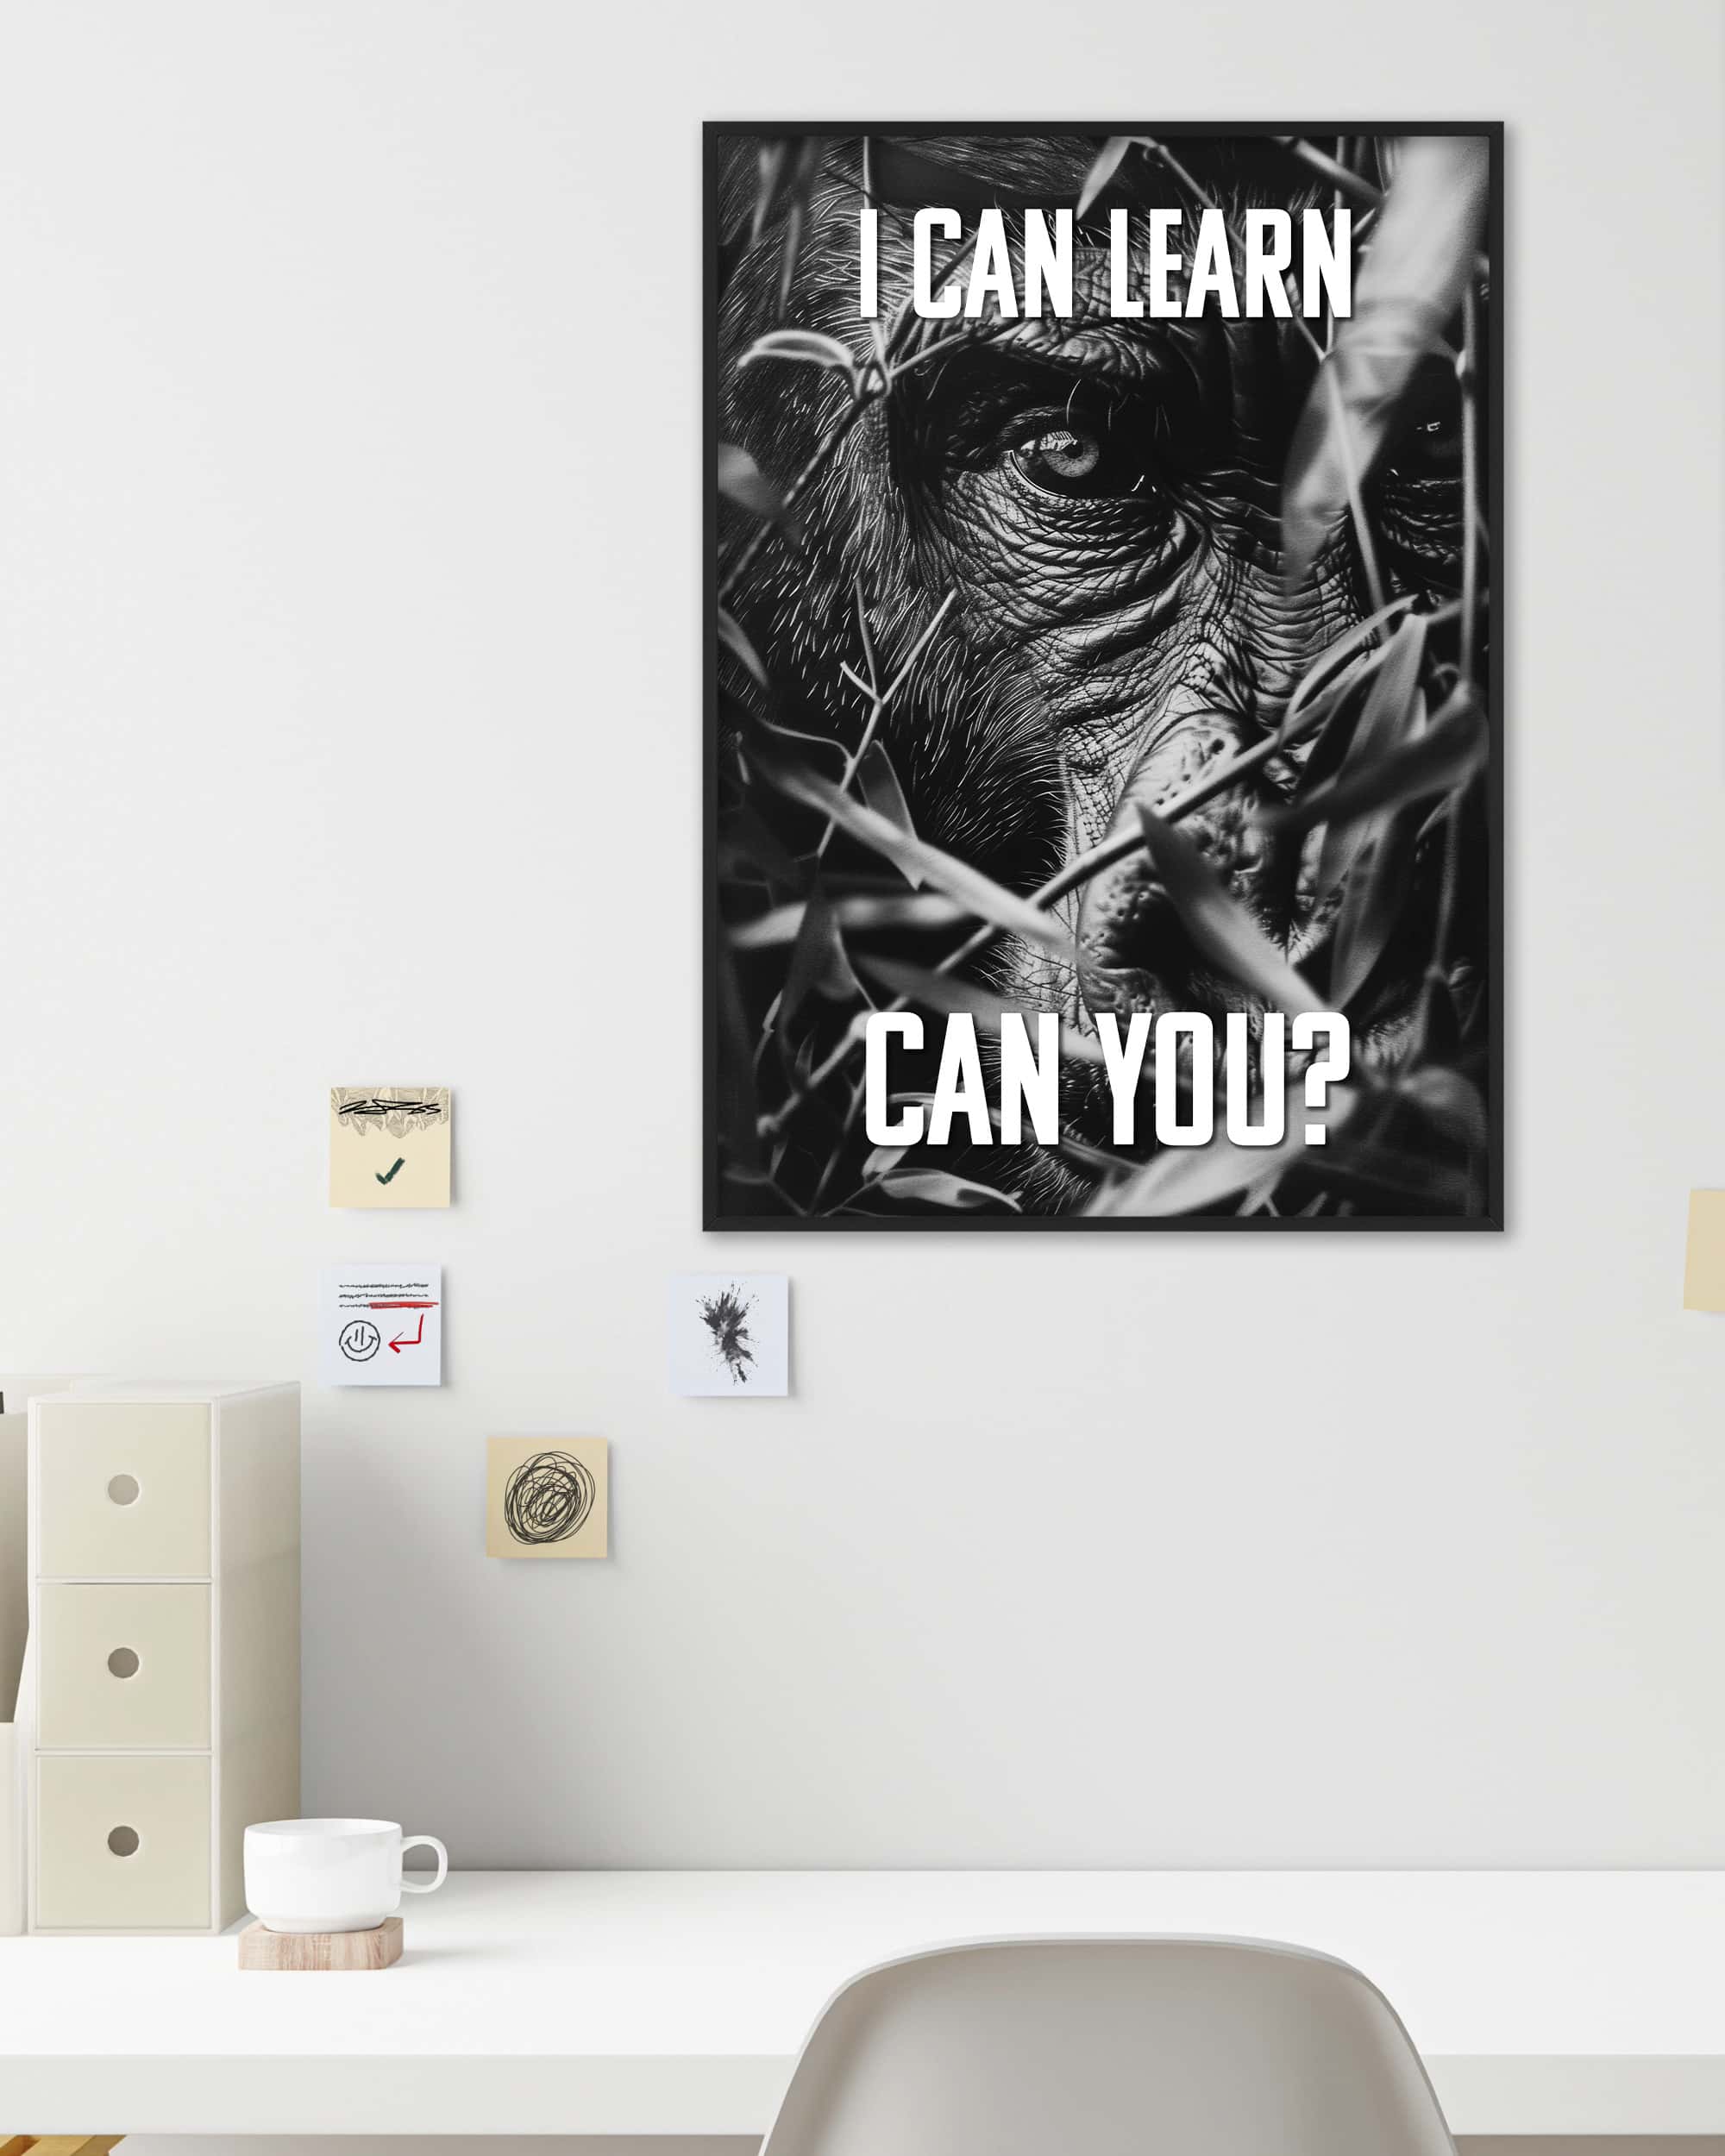 I can learn | Digital Poster